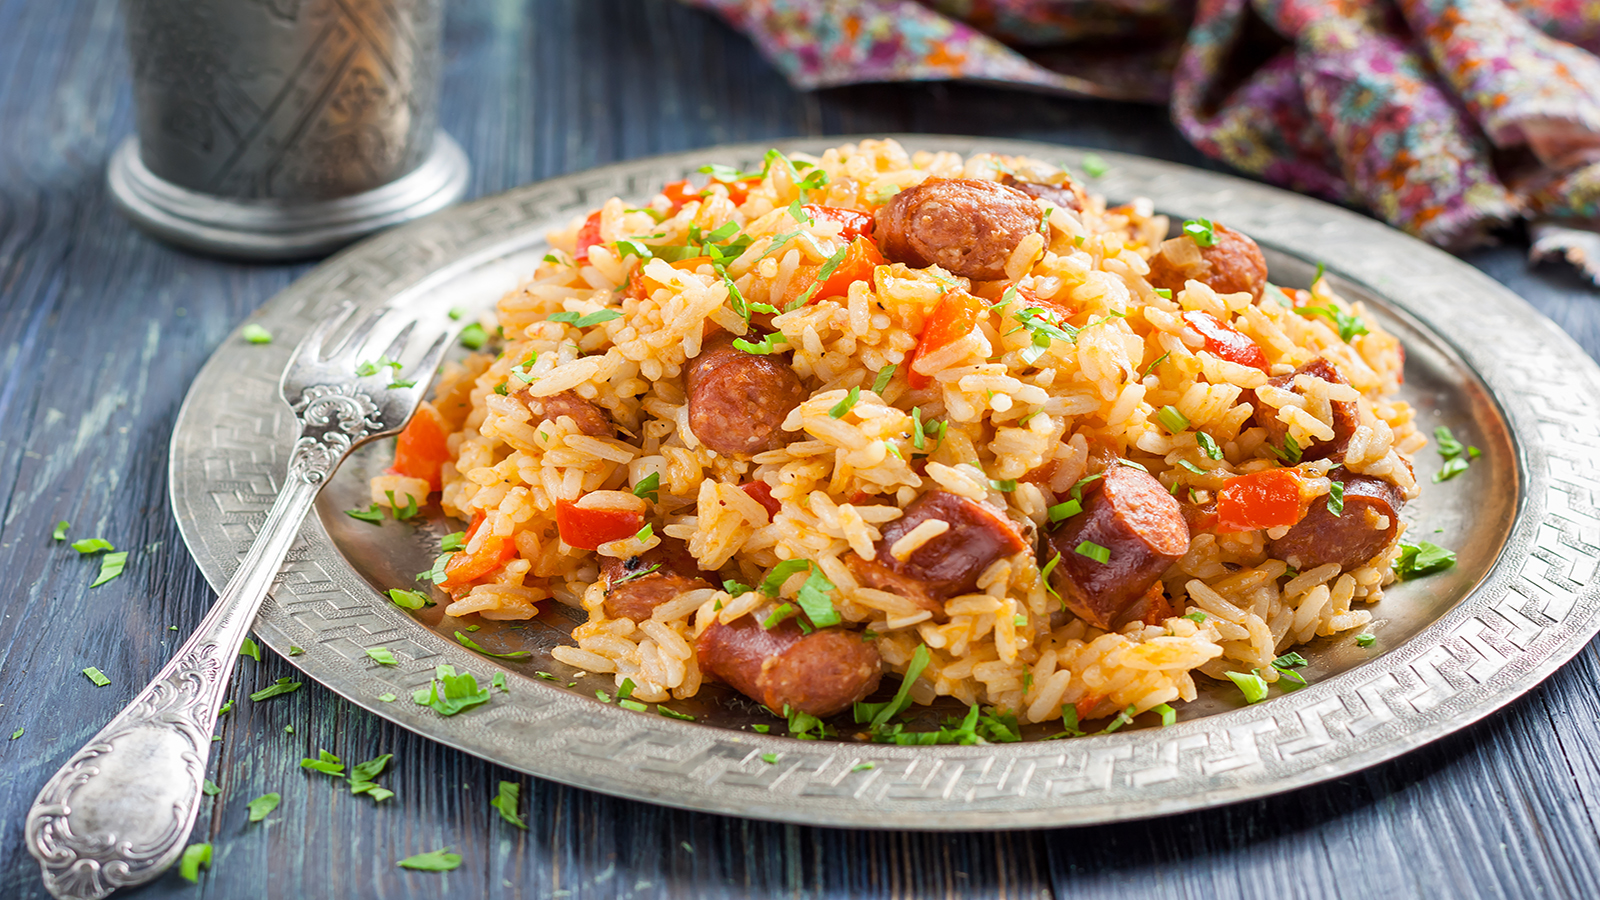 We Know Your Deepest Desire Based on the Carbs You Eat Jambalaya. Spicy rice with smoked sausage and red pepper